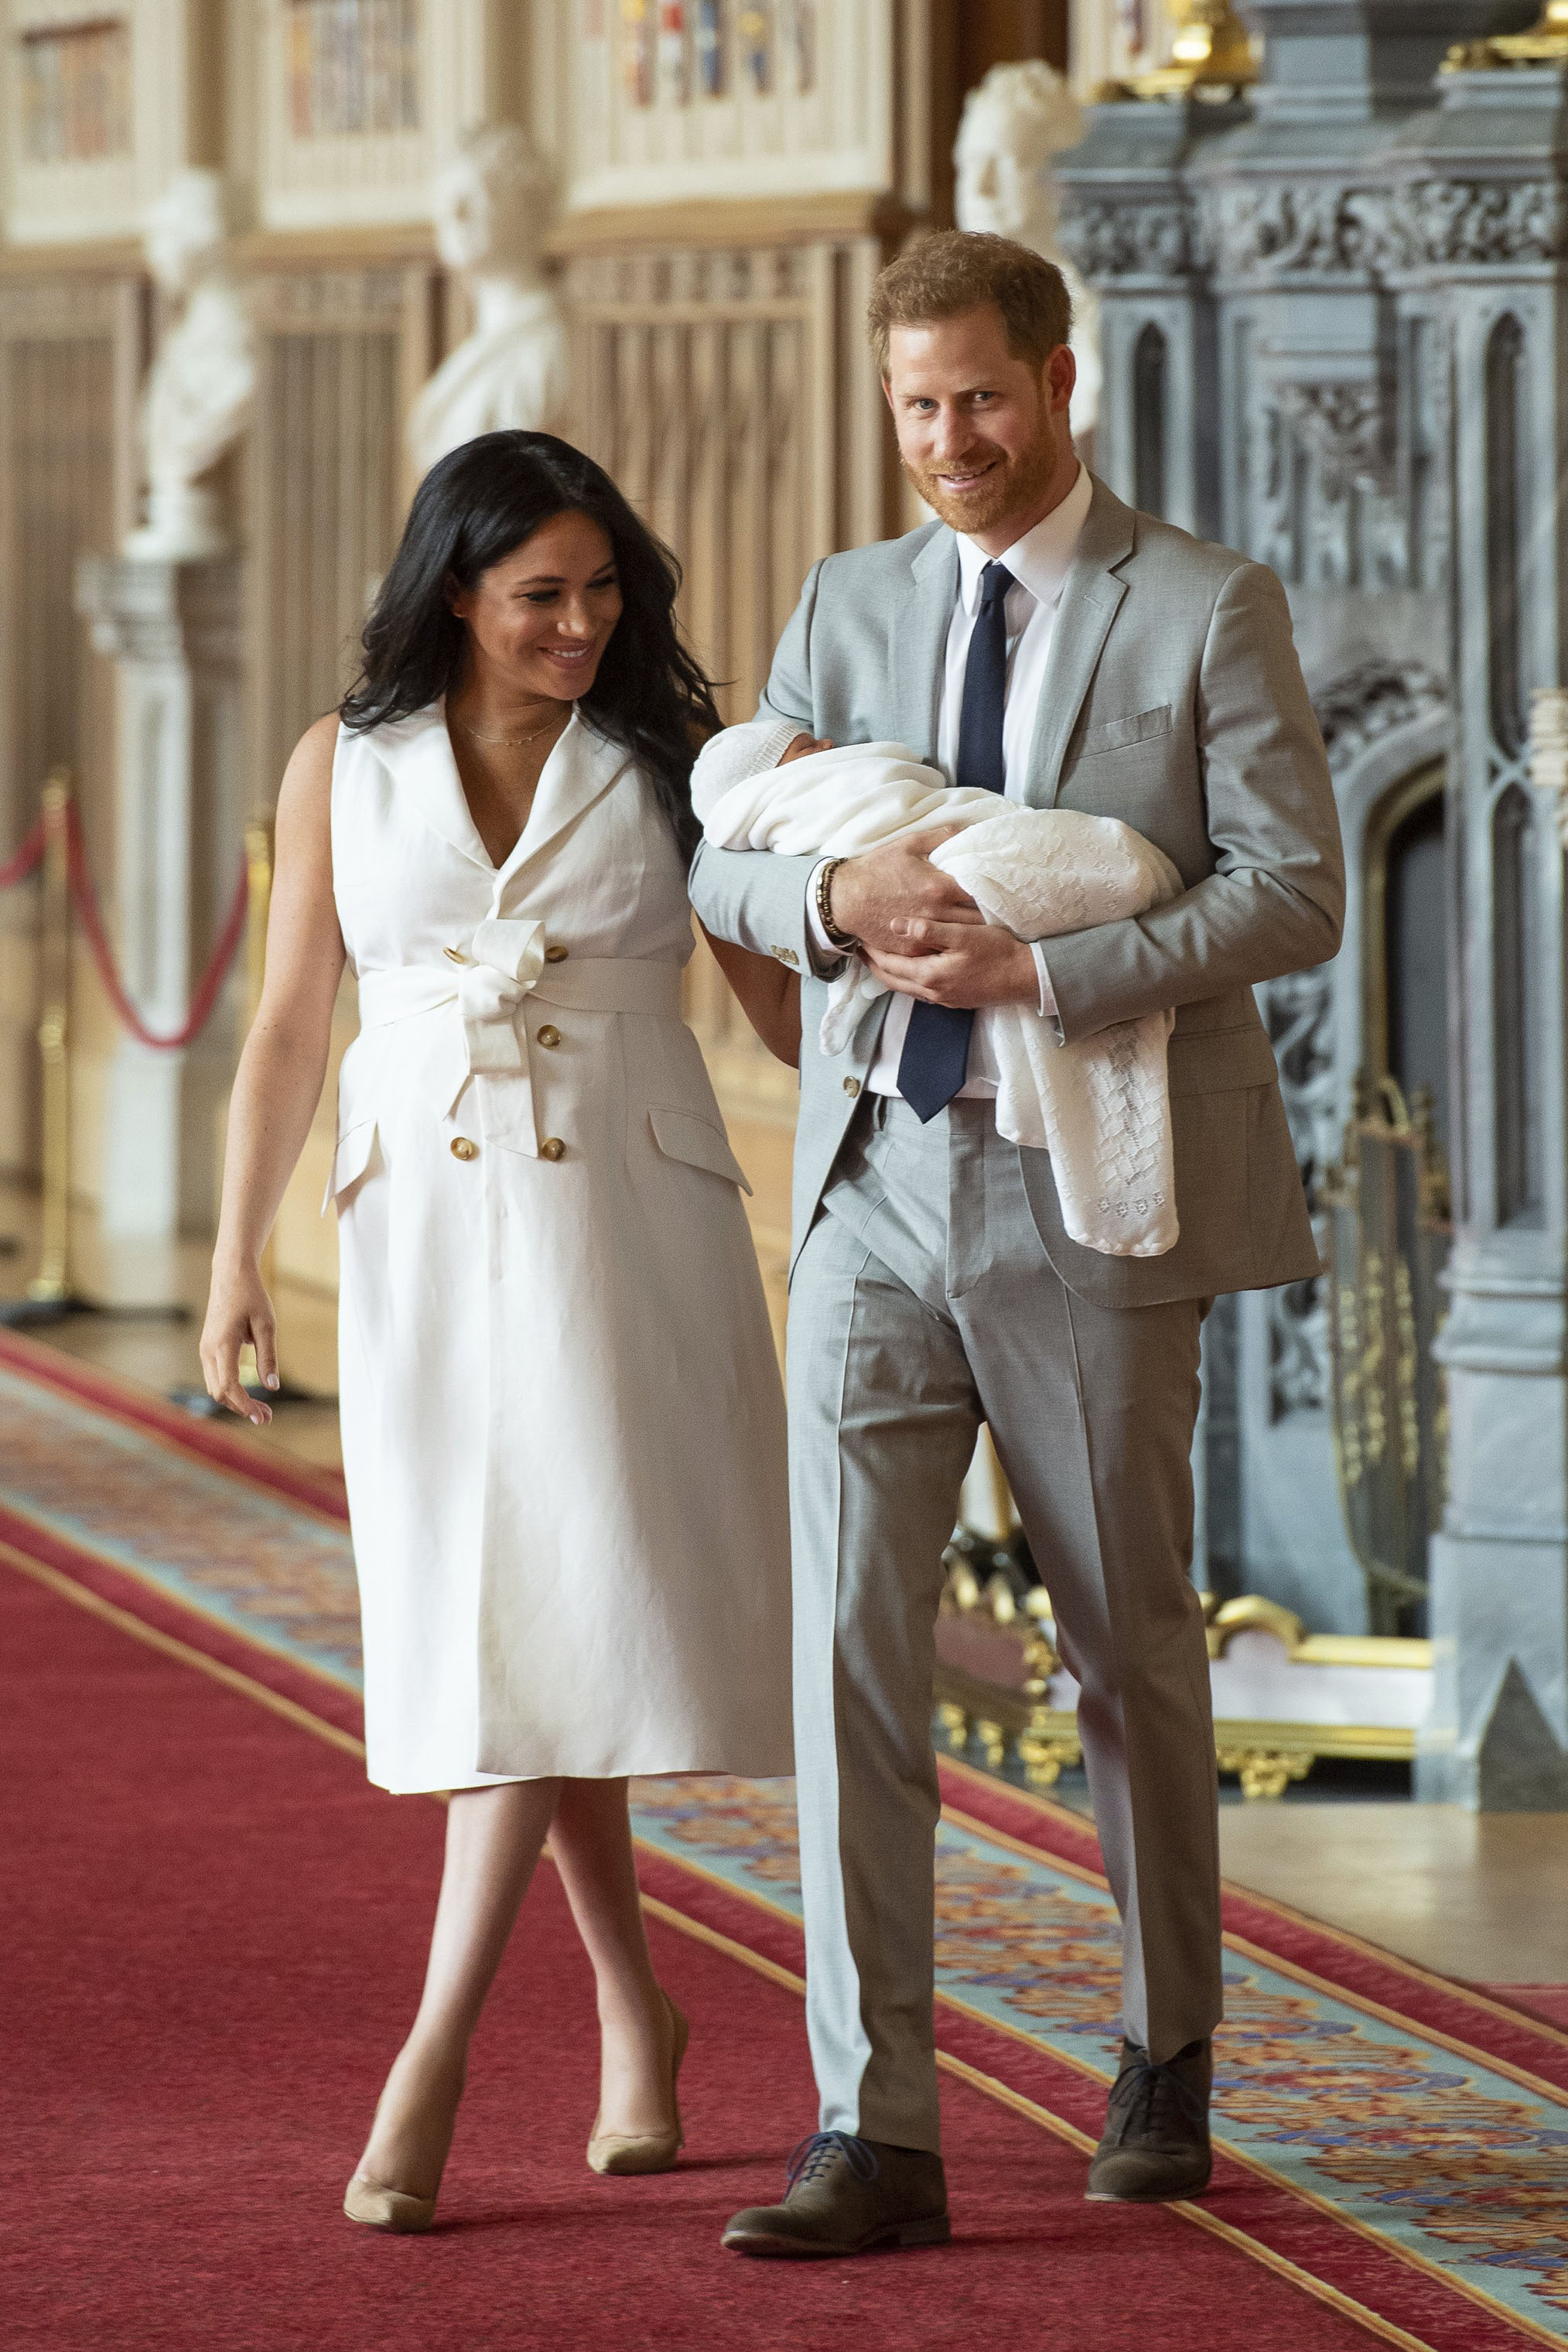 The Duke and Duchess of Sussex with their baby son, who was born on Monday morning, during a photocall in St George's Hall at Windsor Castle in Berkshire. (Dominic Lipinski—AP)